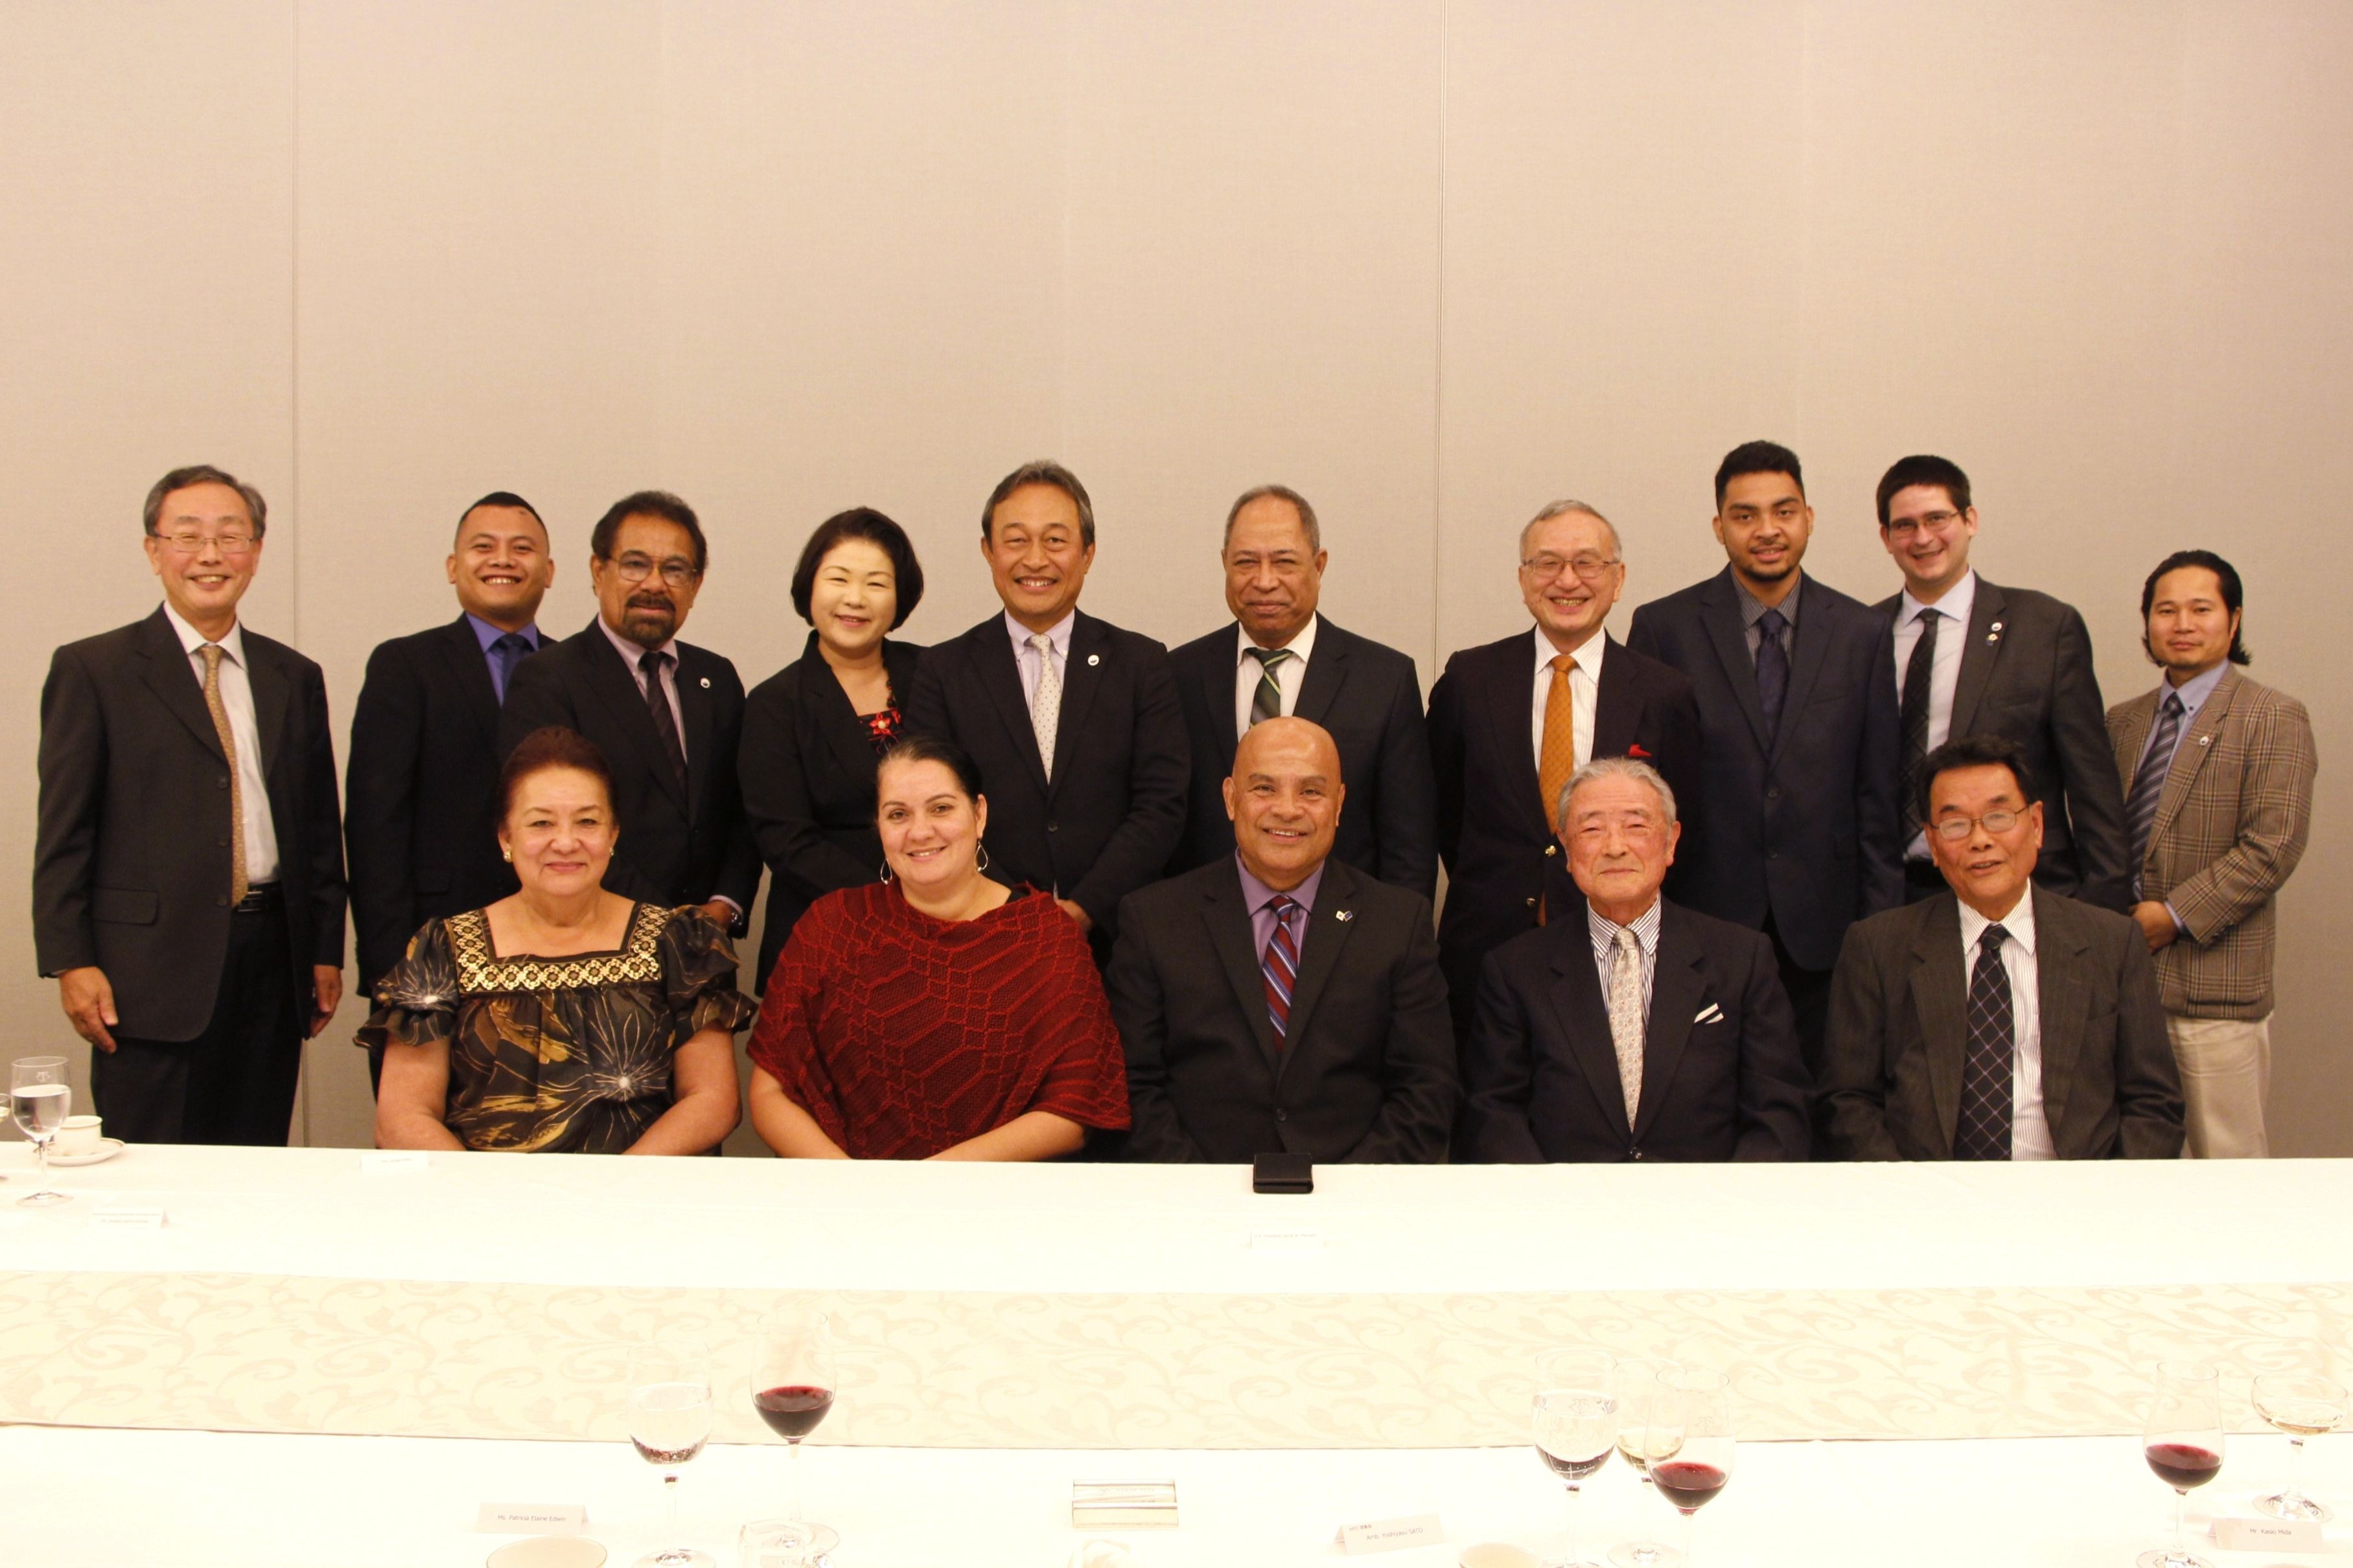 Federated States of Micronesia President Panuelo Reception